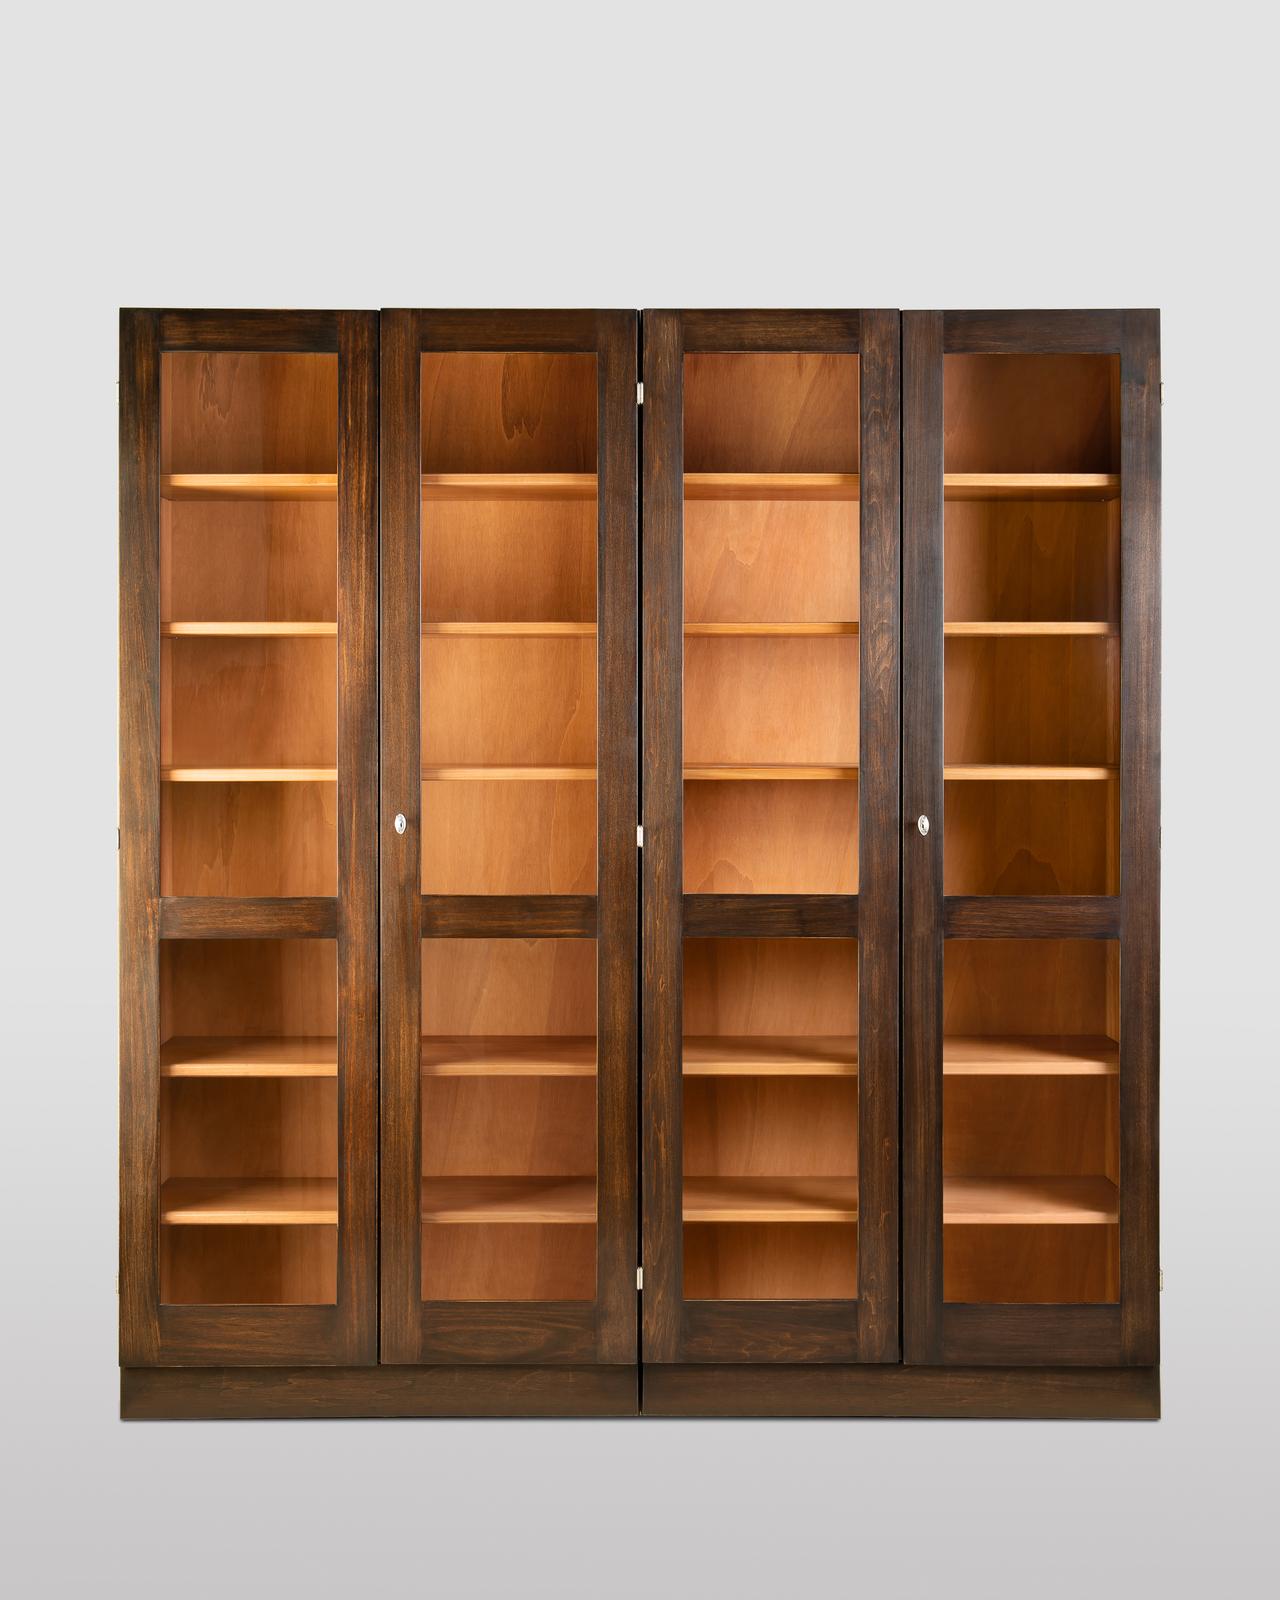 Rustic yet elegant, this four-door, modular bookcase flaunts a clean and sober shape typical of Nordic design. Equipped with twelve internal shelves adjustable in height, it is handcrafted following refined techniques adding to its unrivaled artisan